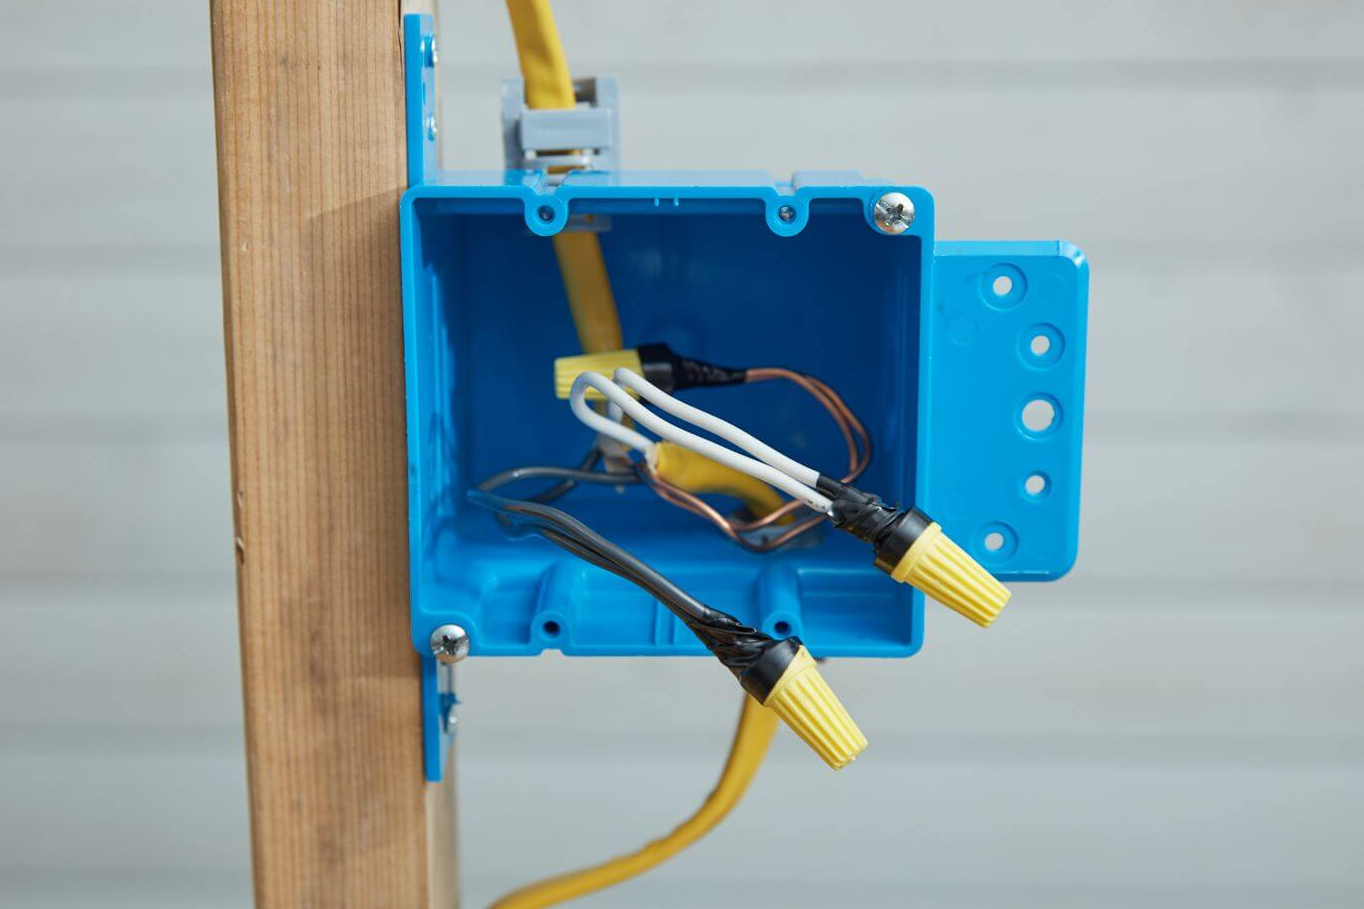 Romex Wiring should always be placed inside of an enclosed Junction box to avoid hazards like electric arcing, resulting in potential fire and electric shocks.